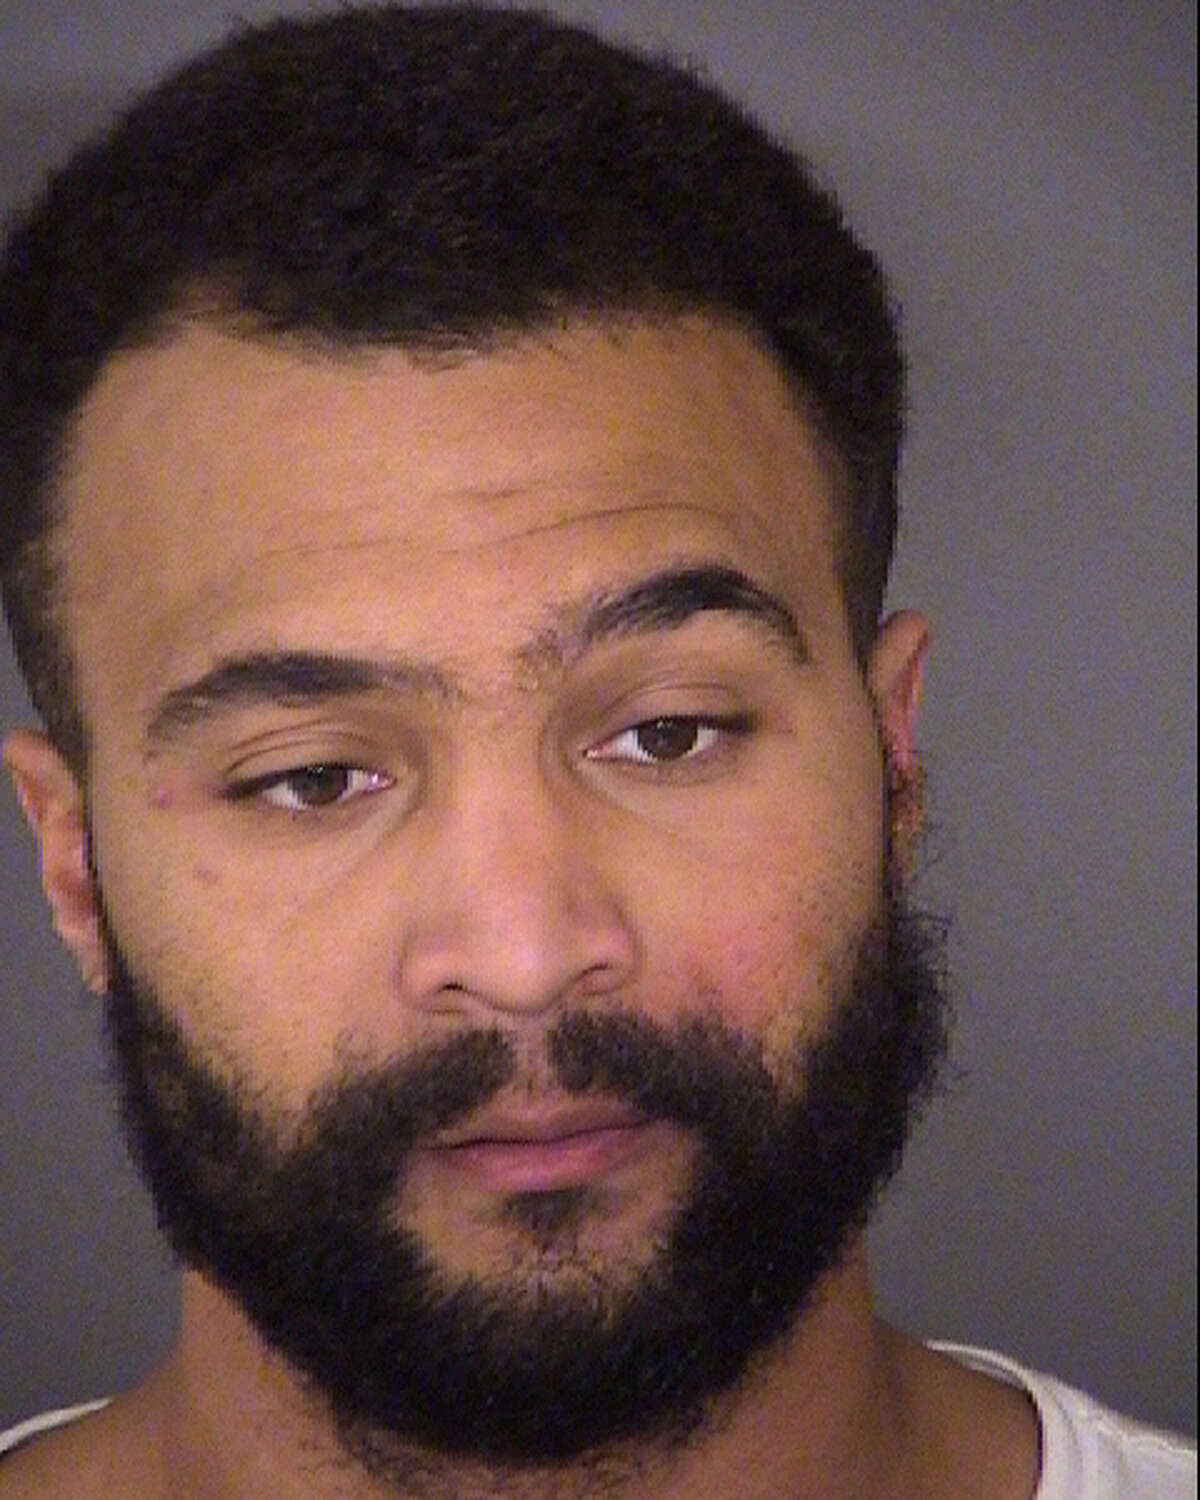 Derrick Stallings, 34, was arrested Wednesday on a felony stalking charge, according to Bexar County Jail records.